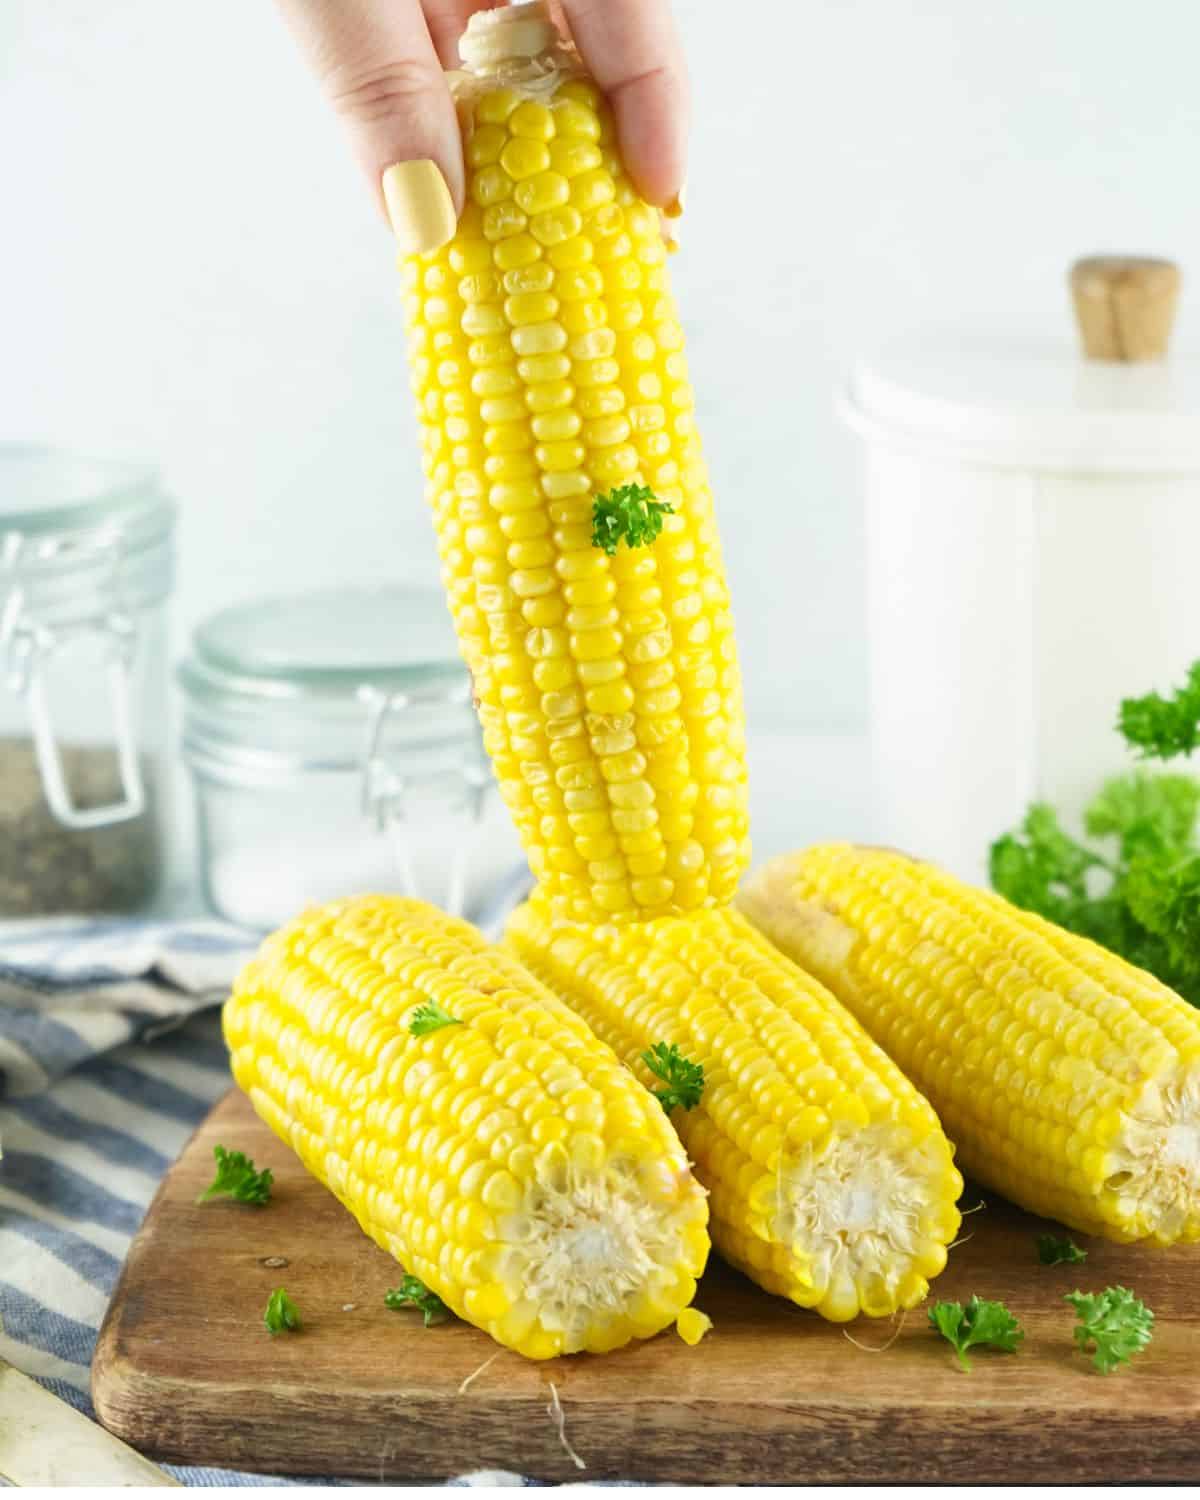 Three ears of corn on a cutting board and another ear of corn above them being held.